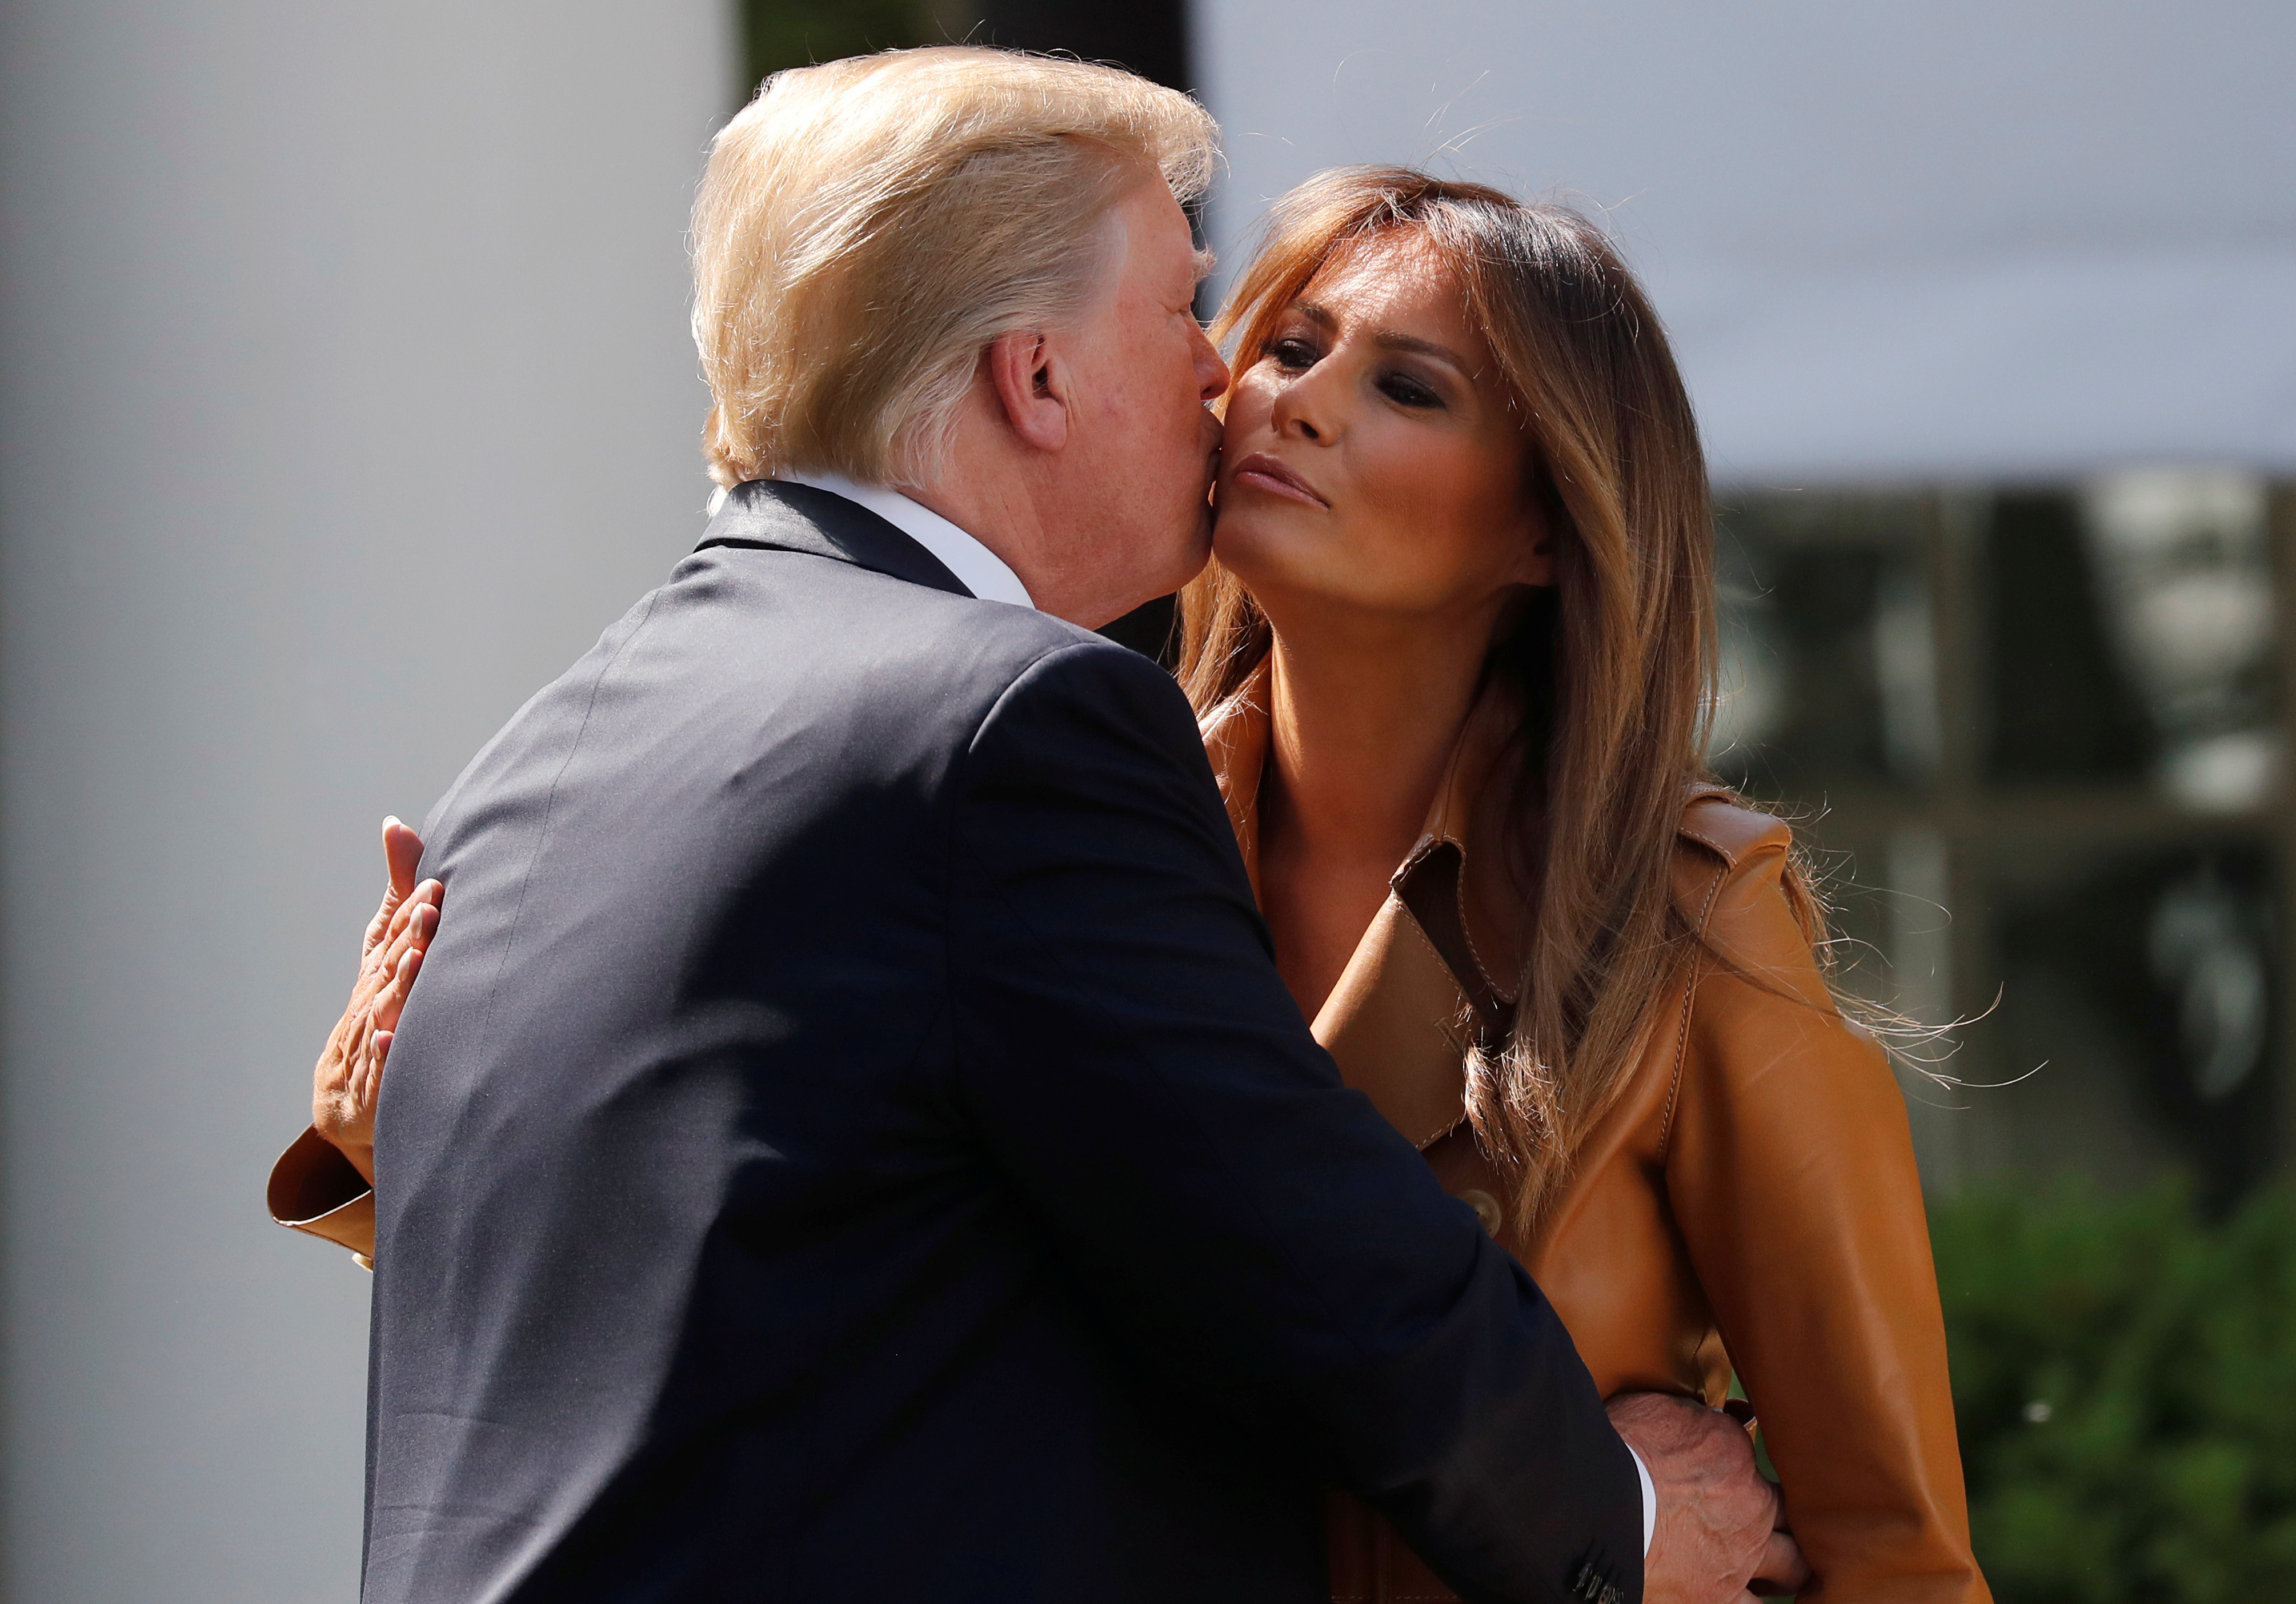 U.S. President Donald Trump kisses first lady Melania Trump at the launch of her "Be Best" initiative in the Rose Garden at the White House in Washington, U.S., May 7, 2018. REUTERS/Leah Millis TPX IMAGES OF THE DAY - RC1F2493C570